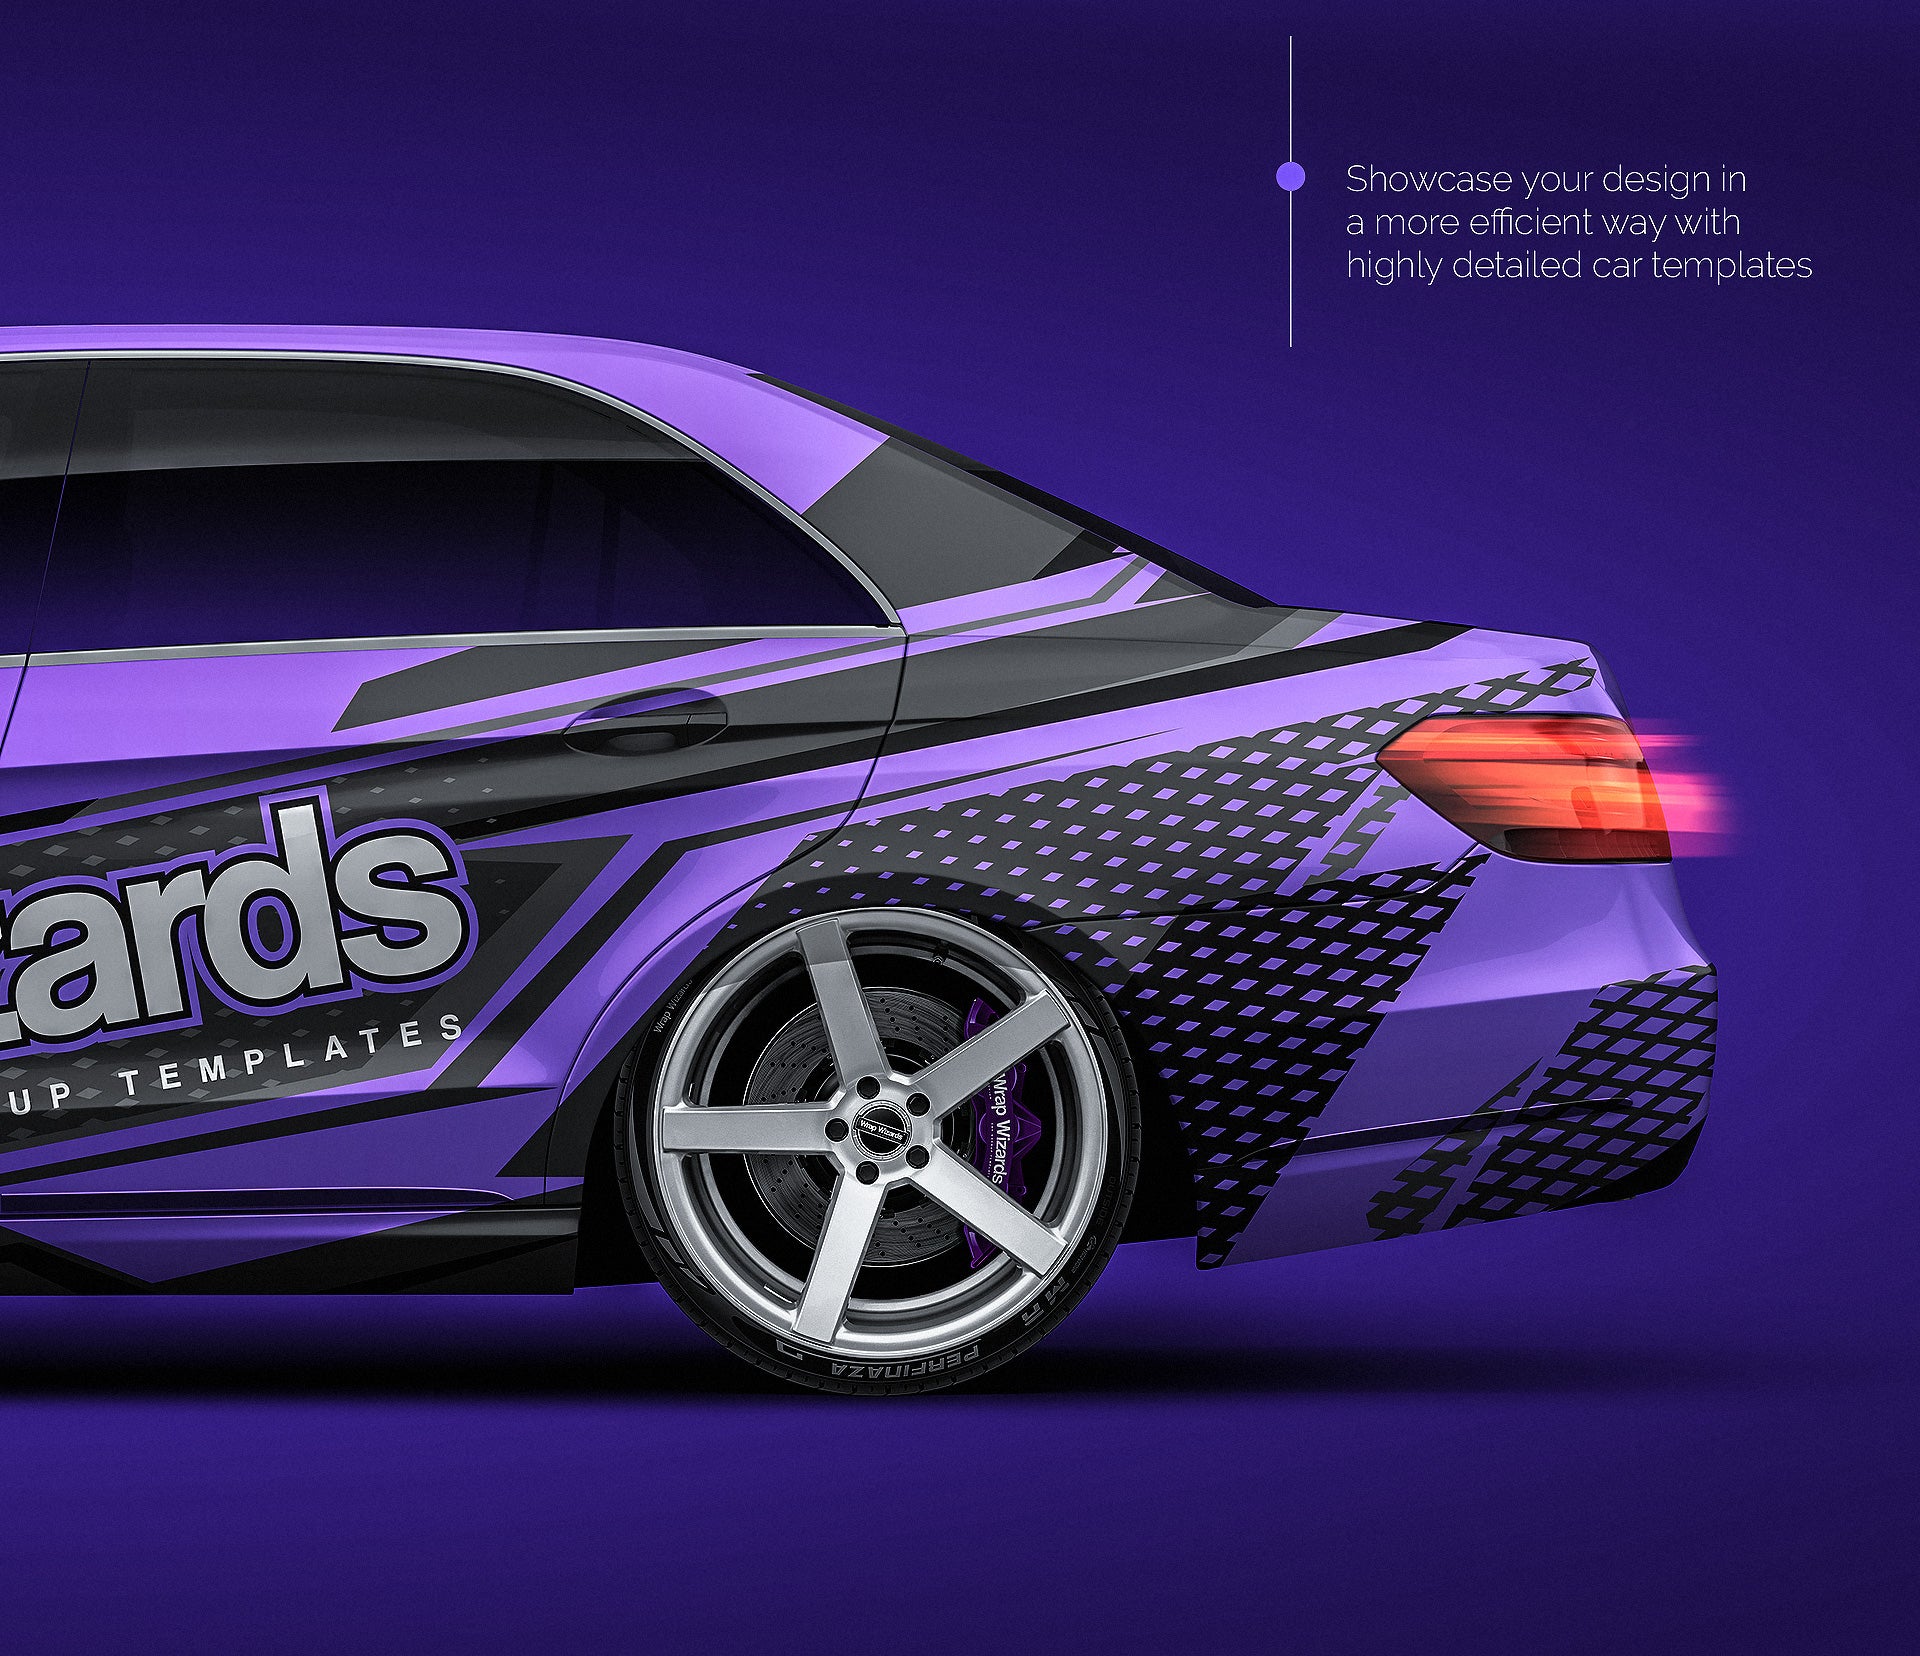 Mercedes-Benz E-Class 2014 glossy finish - all sides Car Mockup Template.psd